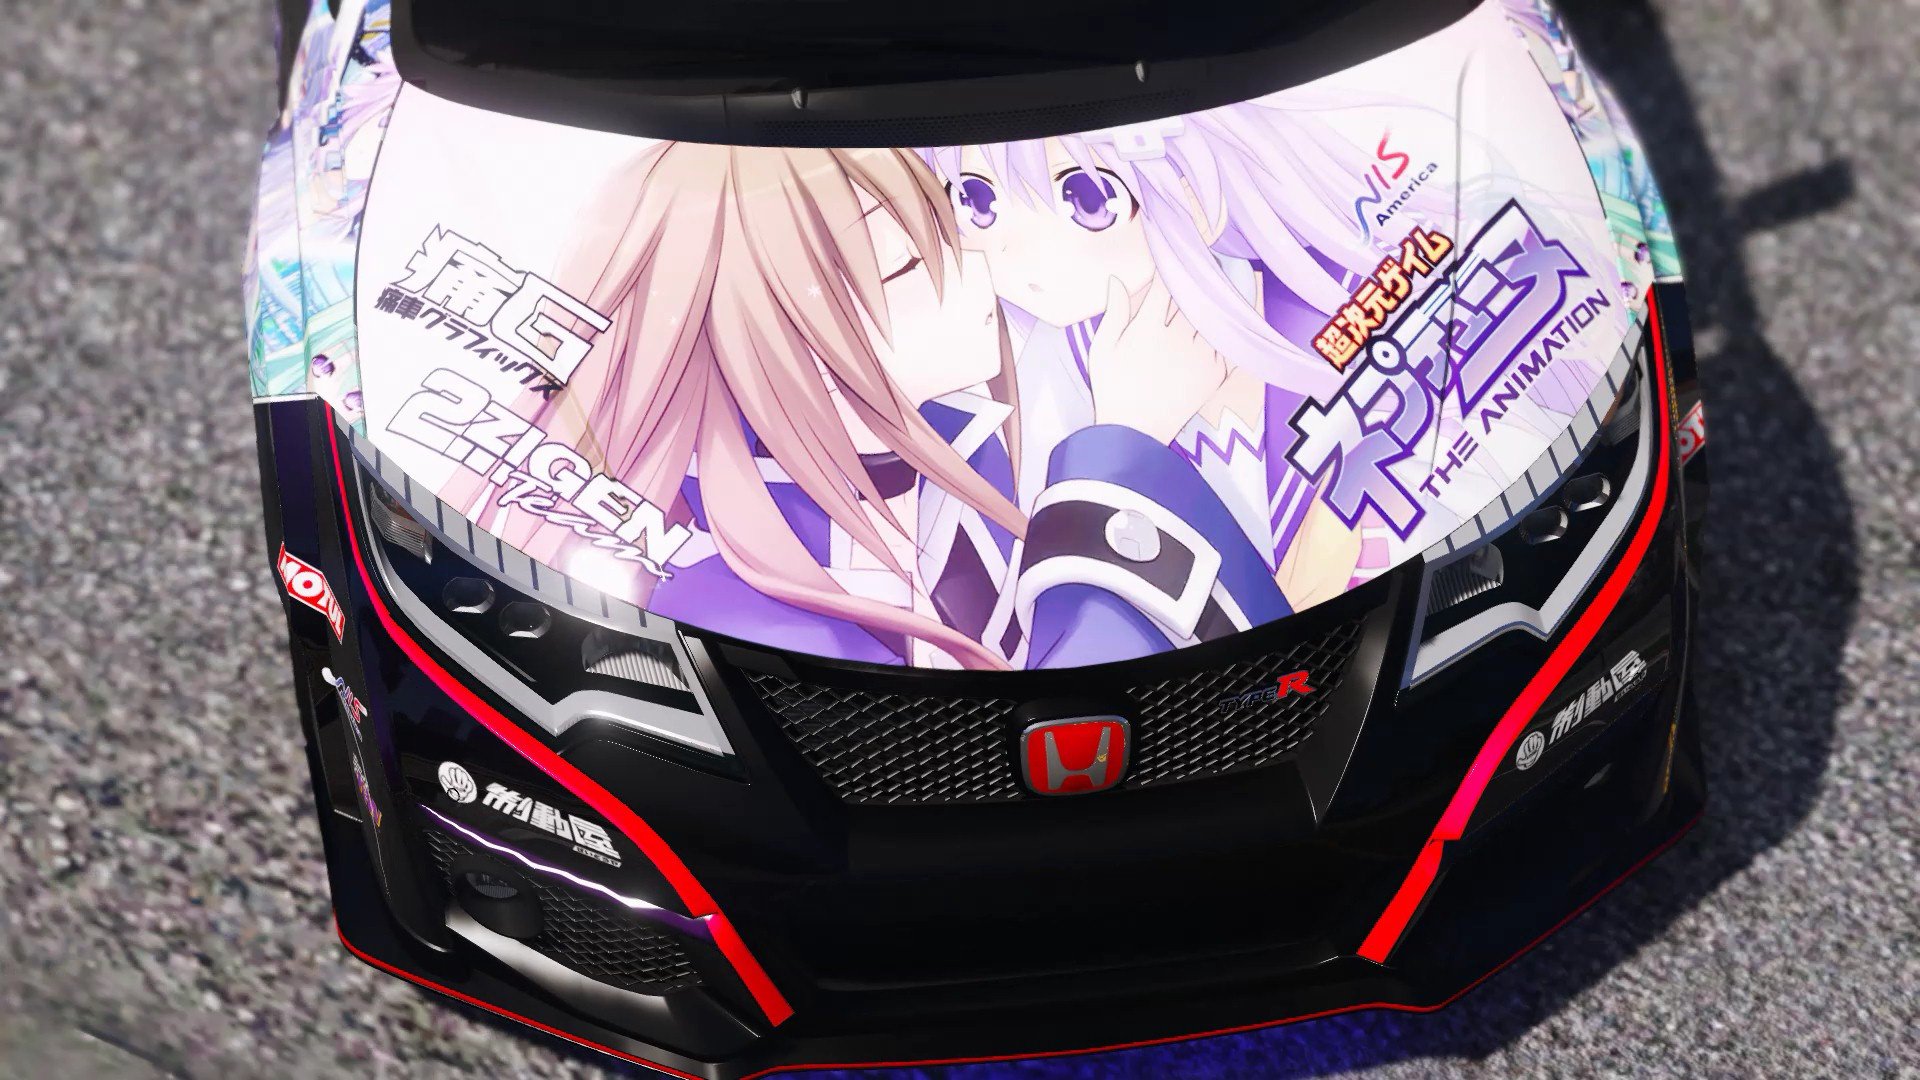 New Honda civic w/ anime stickers guy just dropped : r/TheYardPodcast